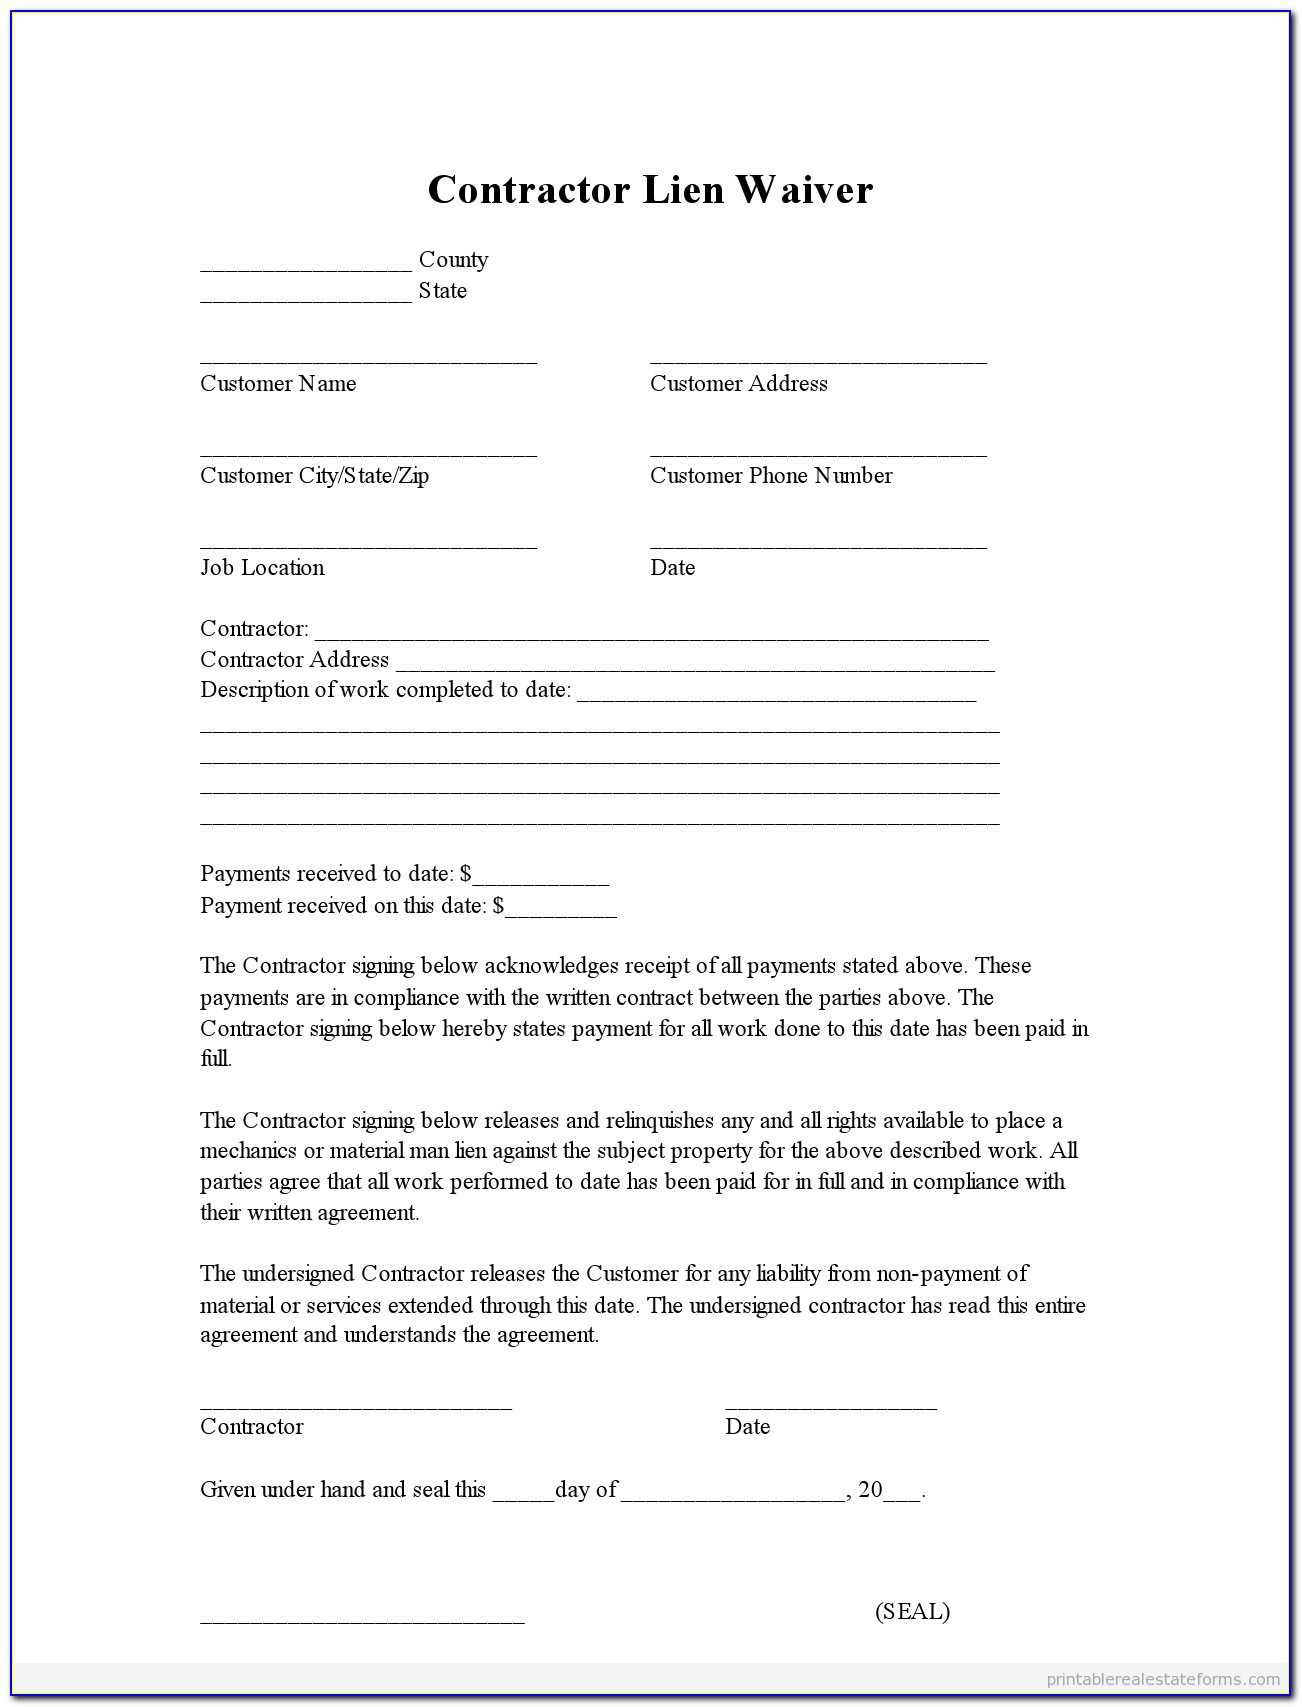 Free Construction Lien Waiver Form